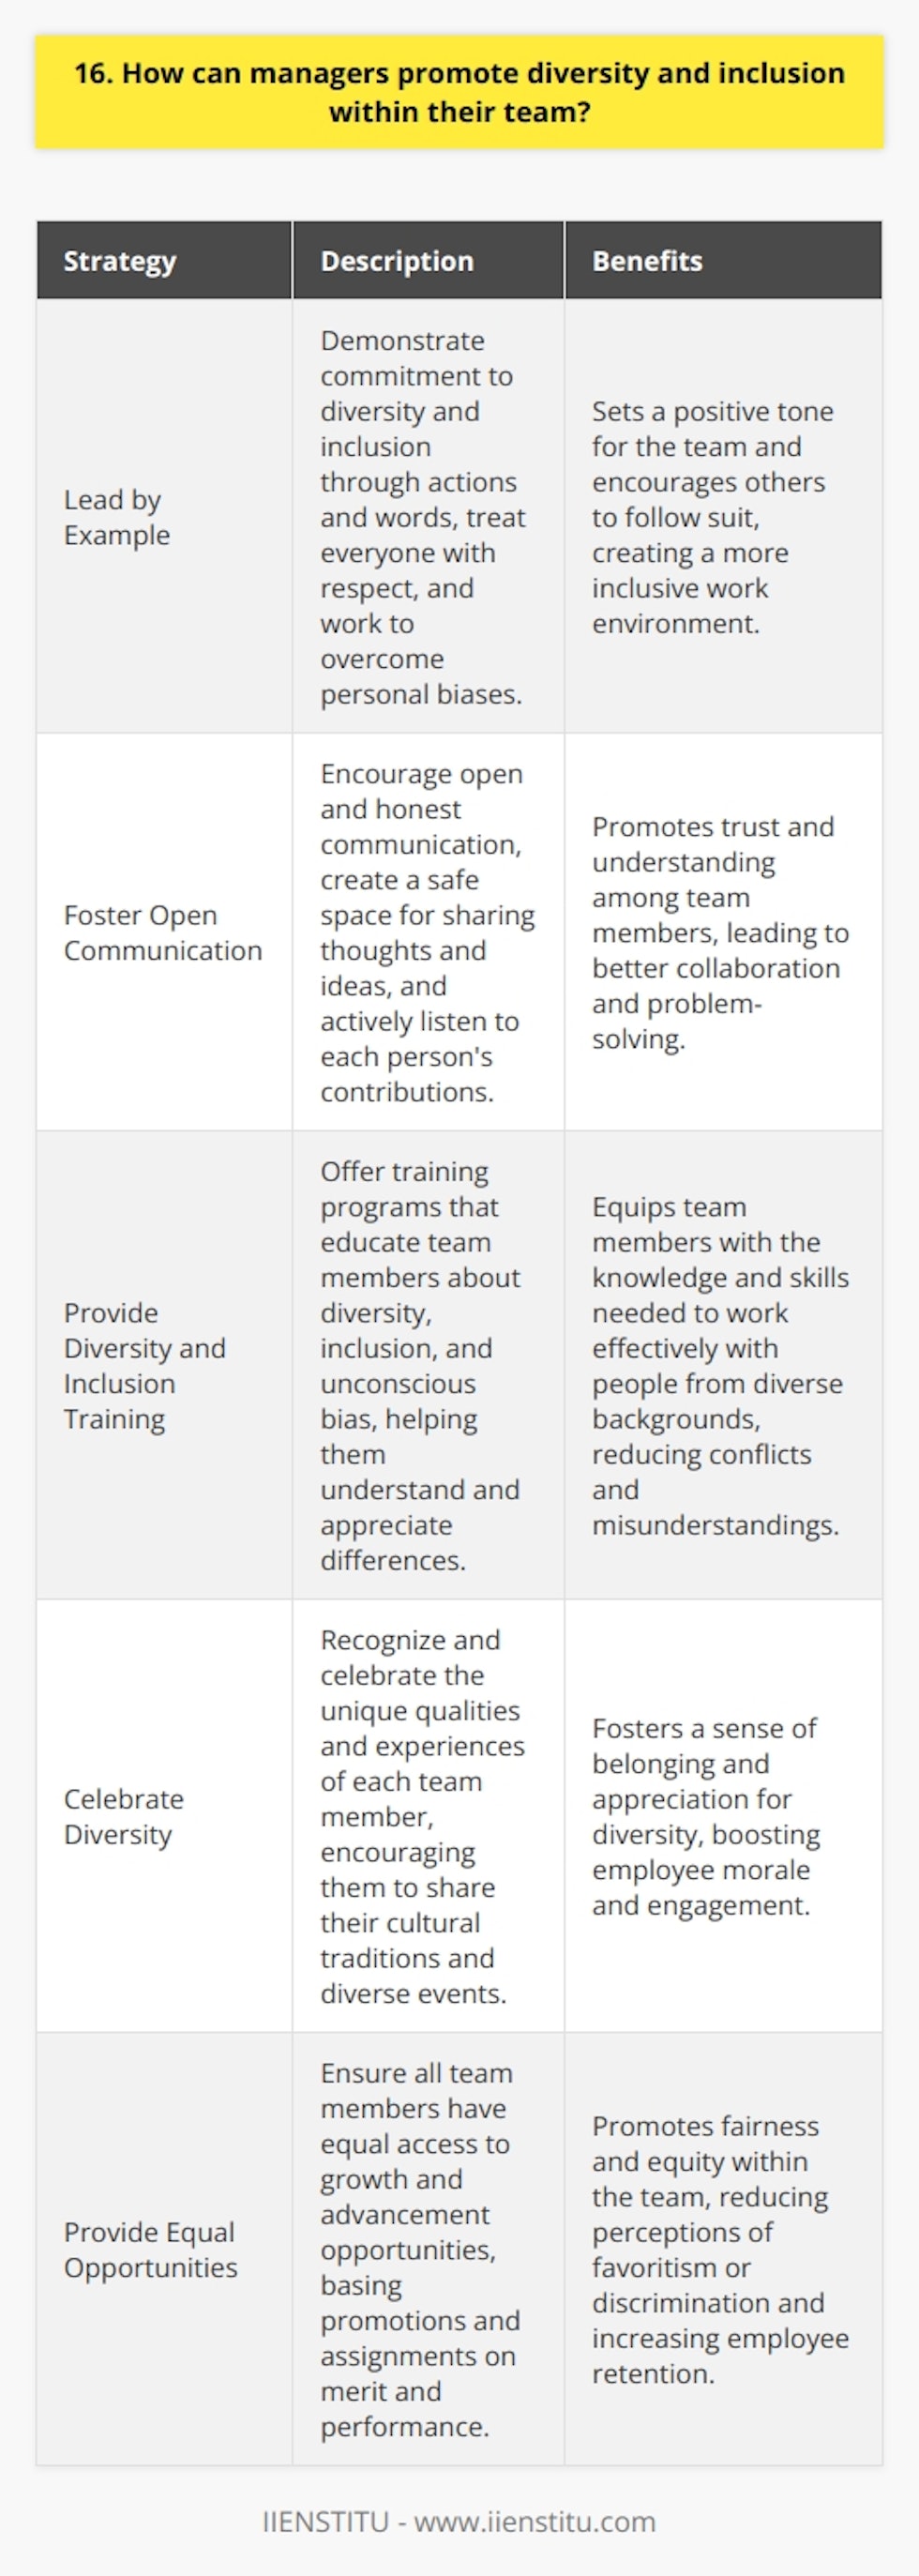 As a manager, promoting diversity and inclusion within your team is crucial for creating a positive work environment. Here are some ways to achieve this: Lead by Example Managers must demonstrate their commitment to diversity and inclusion through their actions and words. Treat everyone with respect and value their unique perspectives. Be mindful of your own biases and work to overcome them. Foster Open Communication Encourage open and honest communication within your team. Create a safe space where everyone feels comfortable sharing their thoughts and ideas. Listen actively and value each persons contributions. Provide Diversity and Inclusion Training Offer training programs that educate your team about diversity, inclusion, and unconscious bias. These programs can help team members understand and appreciate differences, and learn how to work effectively with people from diverse backgrounds. Celebrate Diversity Recognize and celebrate the unique qualities and experiences that each team member brings to the table. Encourage team members to share their cultural traditions and celebrate diverse holidays and events. Hire Diverse Candidates When hiring new team members, actively seek out candidates from diverse backgrounds. This can help bring fresh perspectives and ideas to your team. Provide Equal Opportunities Ensure that all team members have equal access to opportunities for growth and advancement. Base promotions and assignments on merit and performance, not on personal characteristics or biases. By implementing these strategies, managers can create a more inclusive and diverse team that values and respects all individuals. This not only improves employee morale and productivity but also helps the company succeed in todays global marketplace.